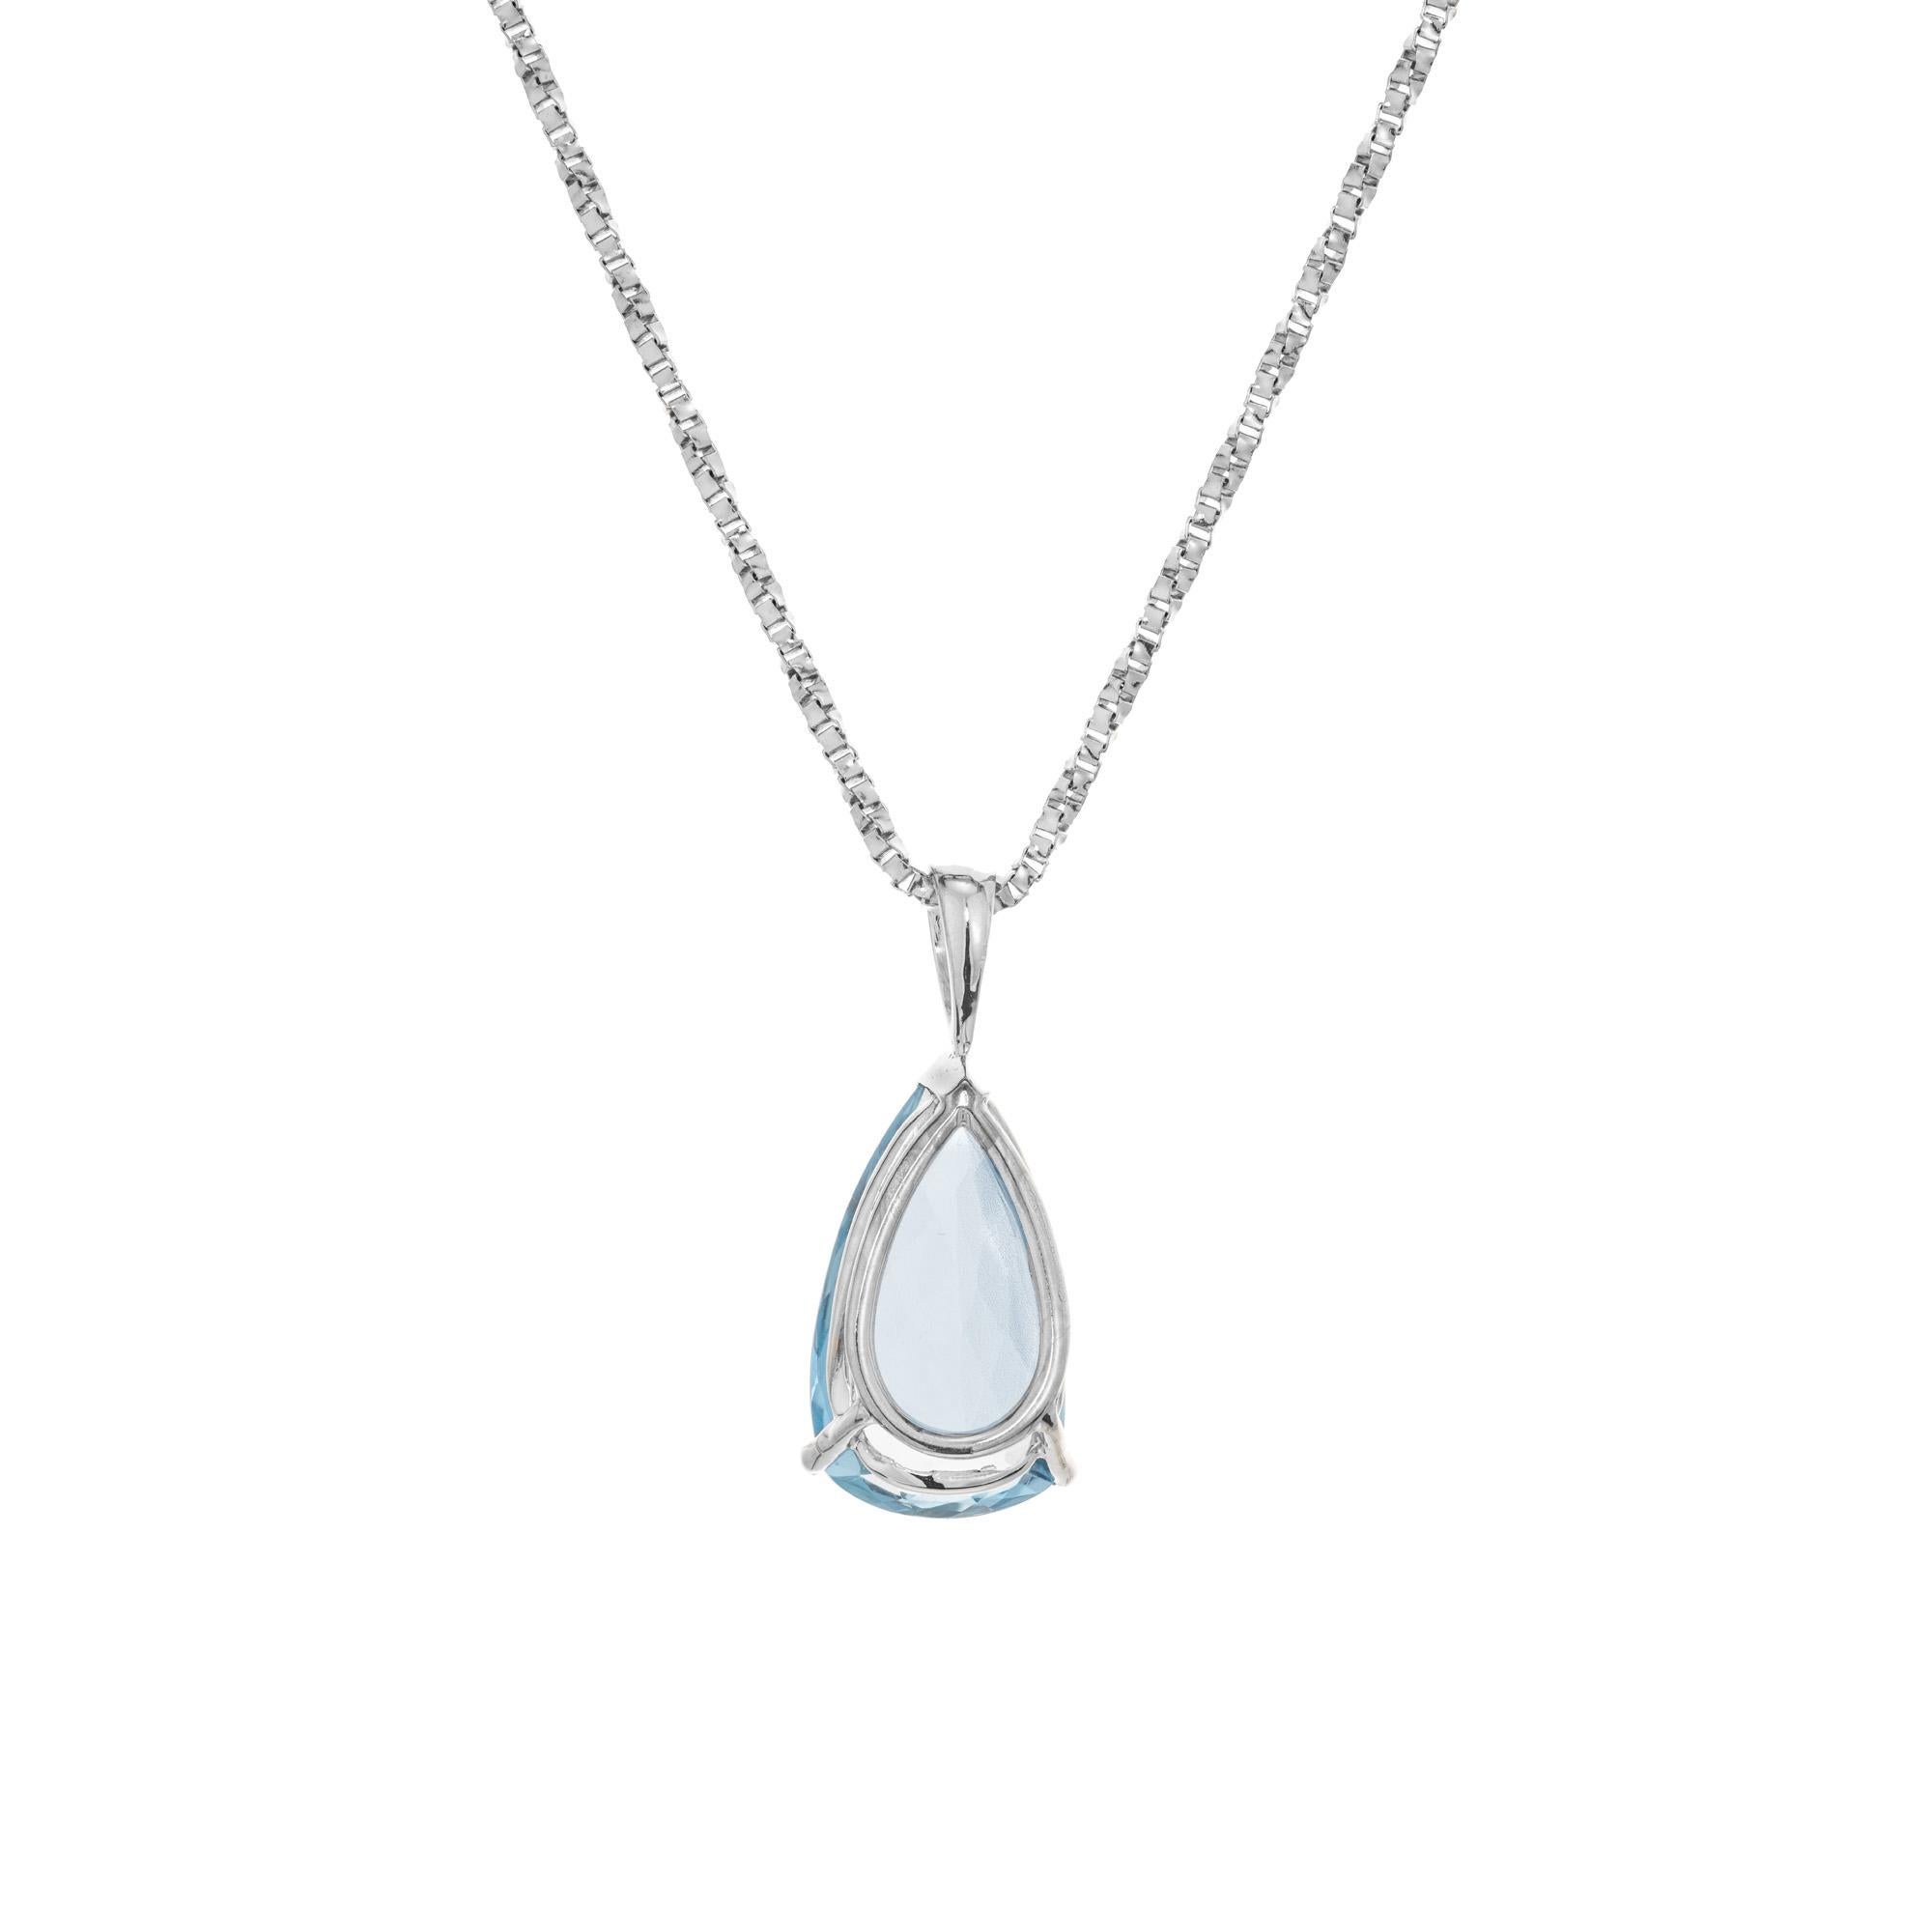 Peter Suchy 3.00 Carat Pear Shape Aquamarine White Gold Pendant Necklace  In New Condition For Sale In Stamford, CT